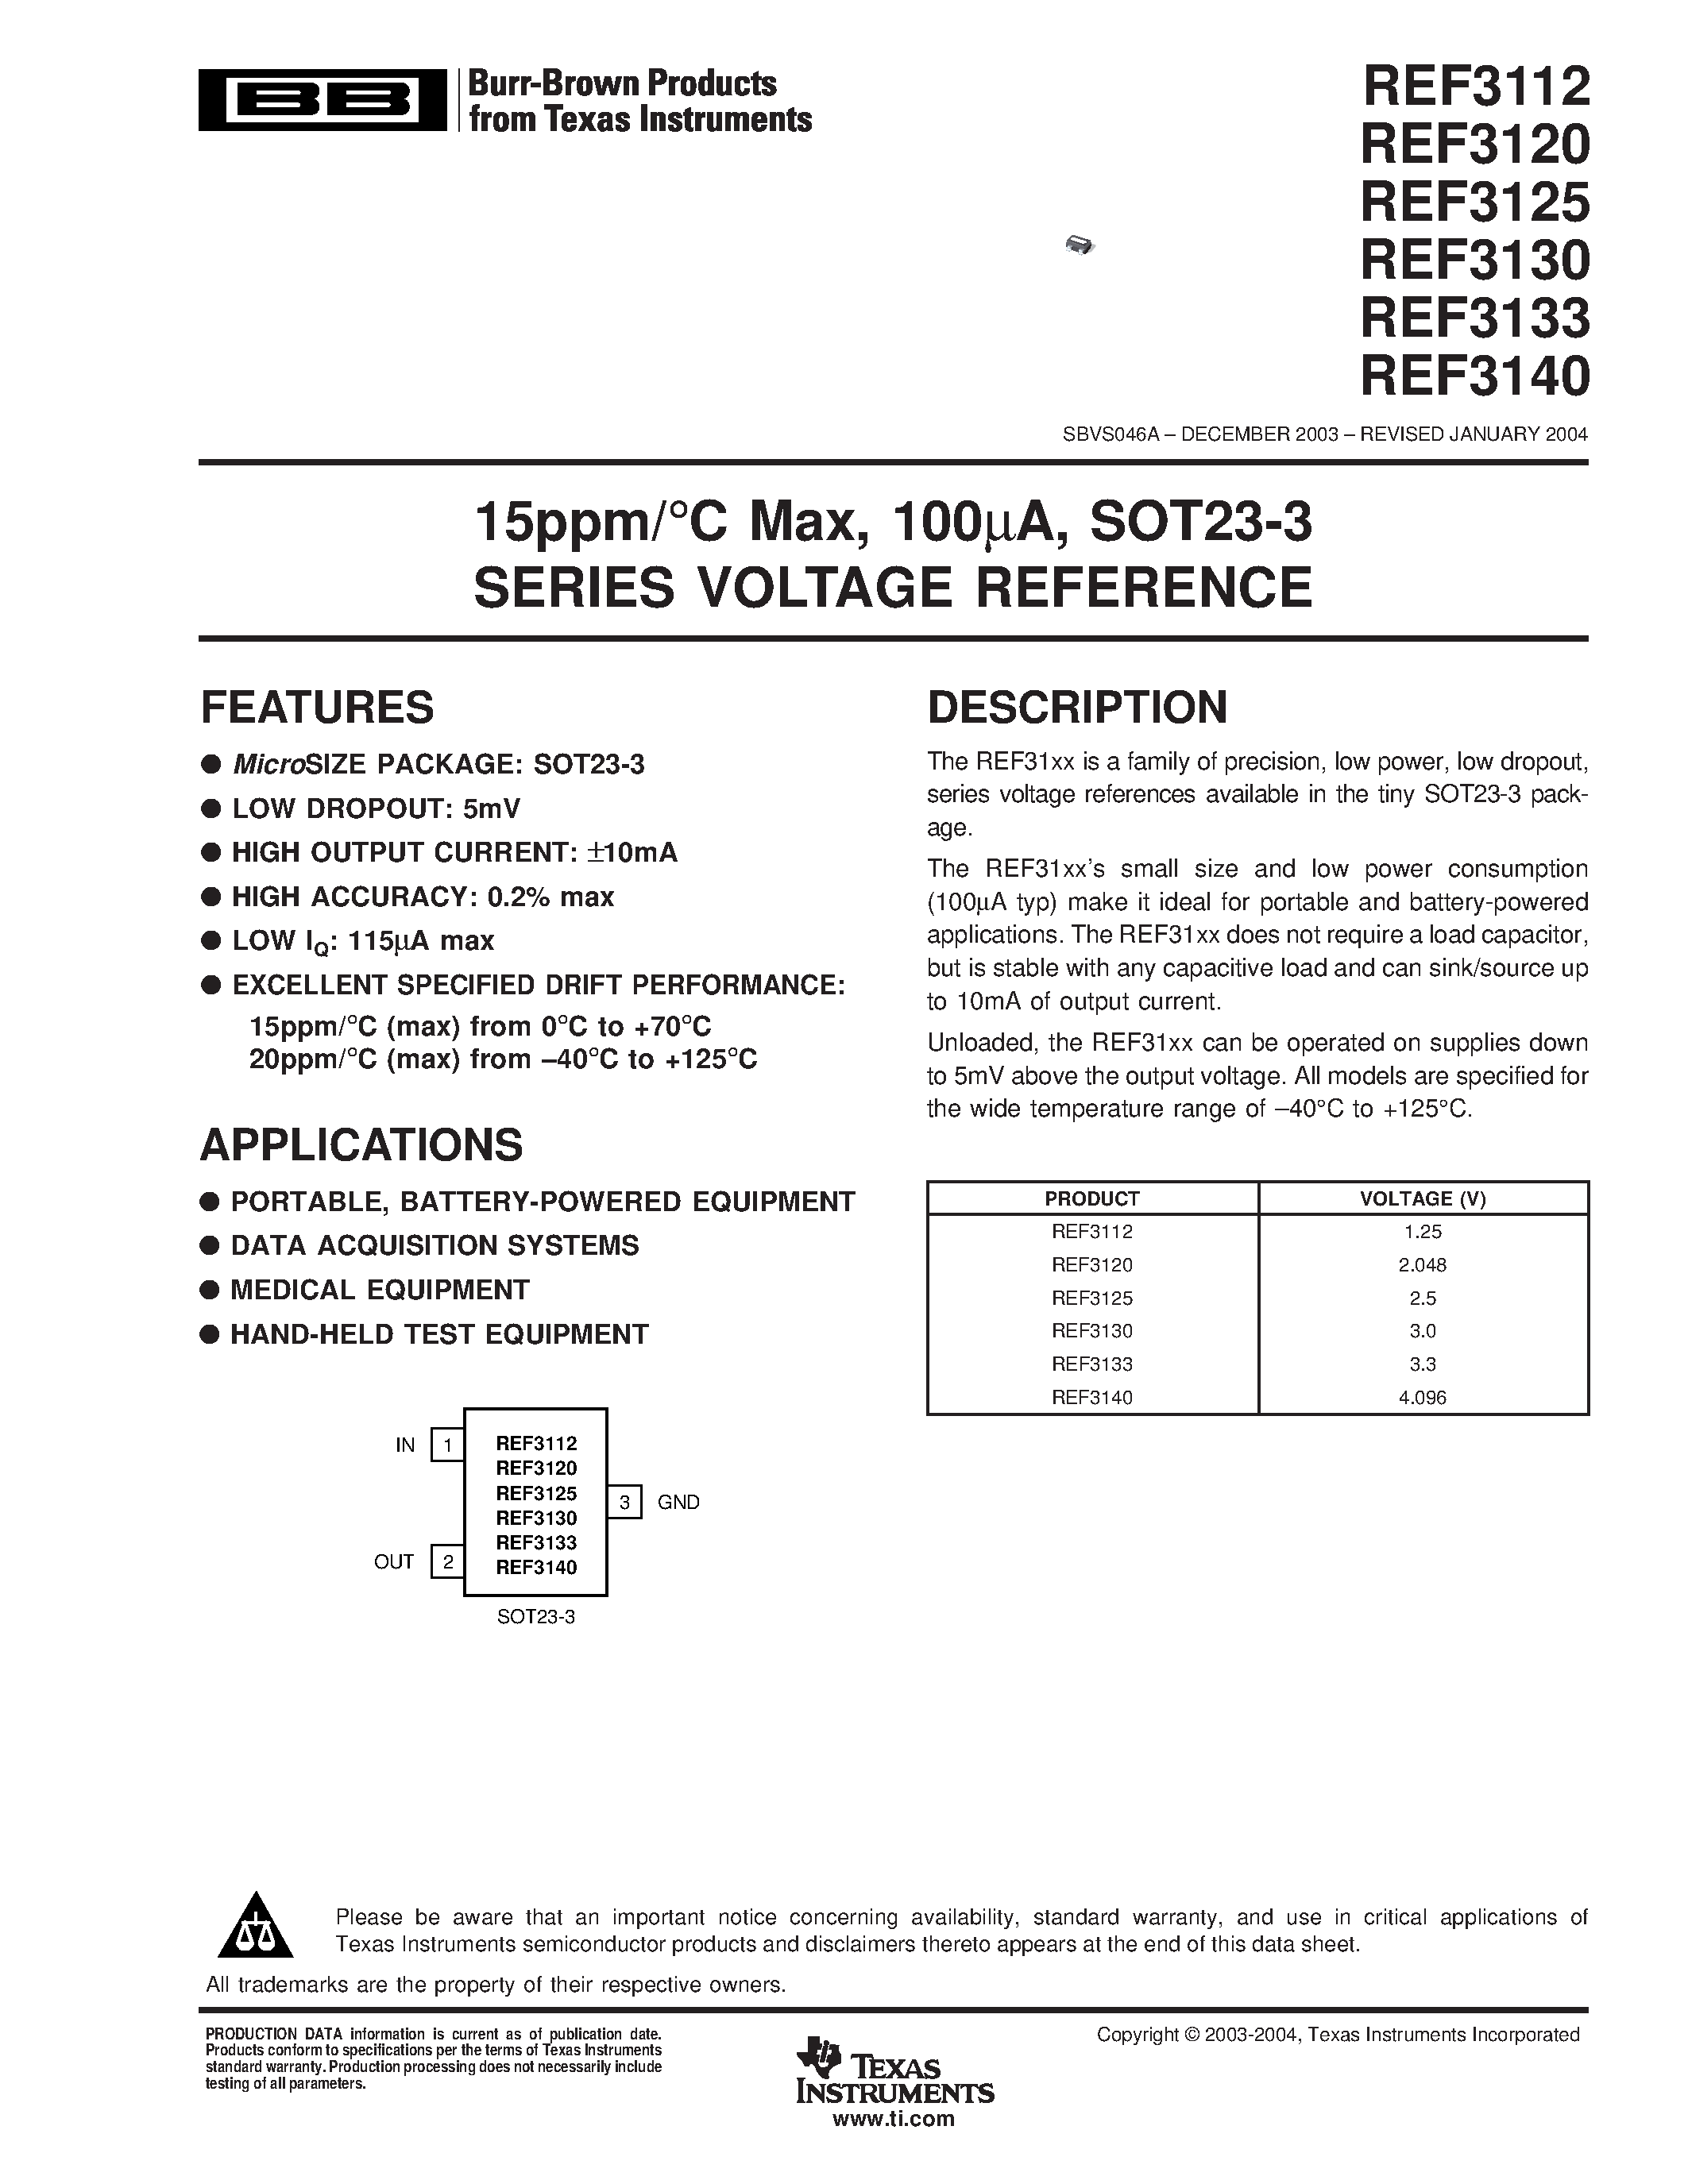 Даташит REF3112 - 15ppm/C Max/ 100UA/ SOT23-3 SERIES VOLTAGE REFERENCE страница 1